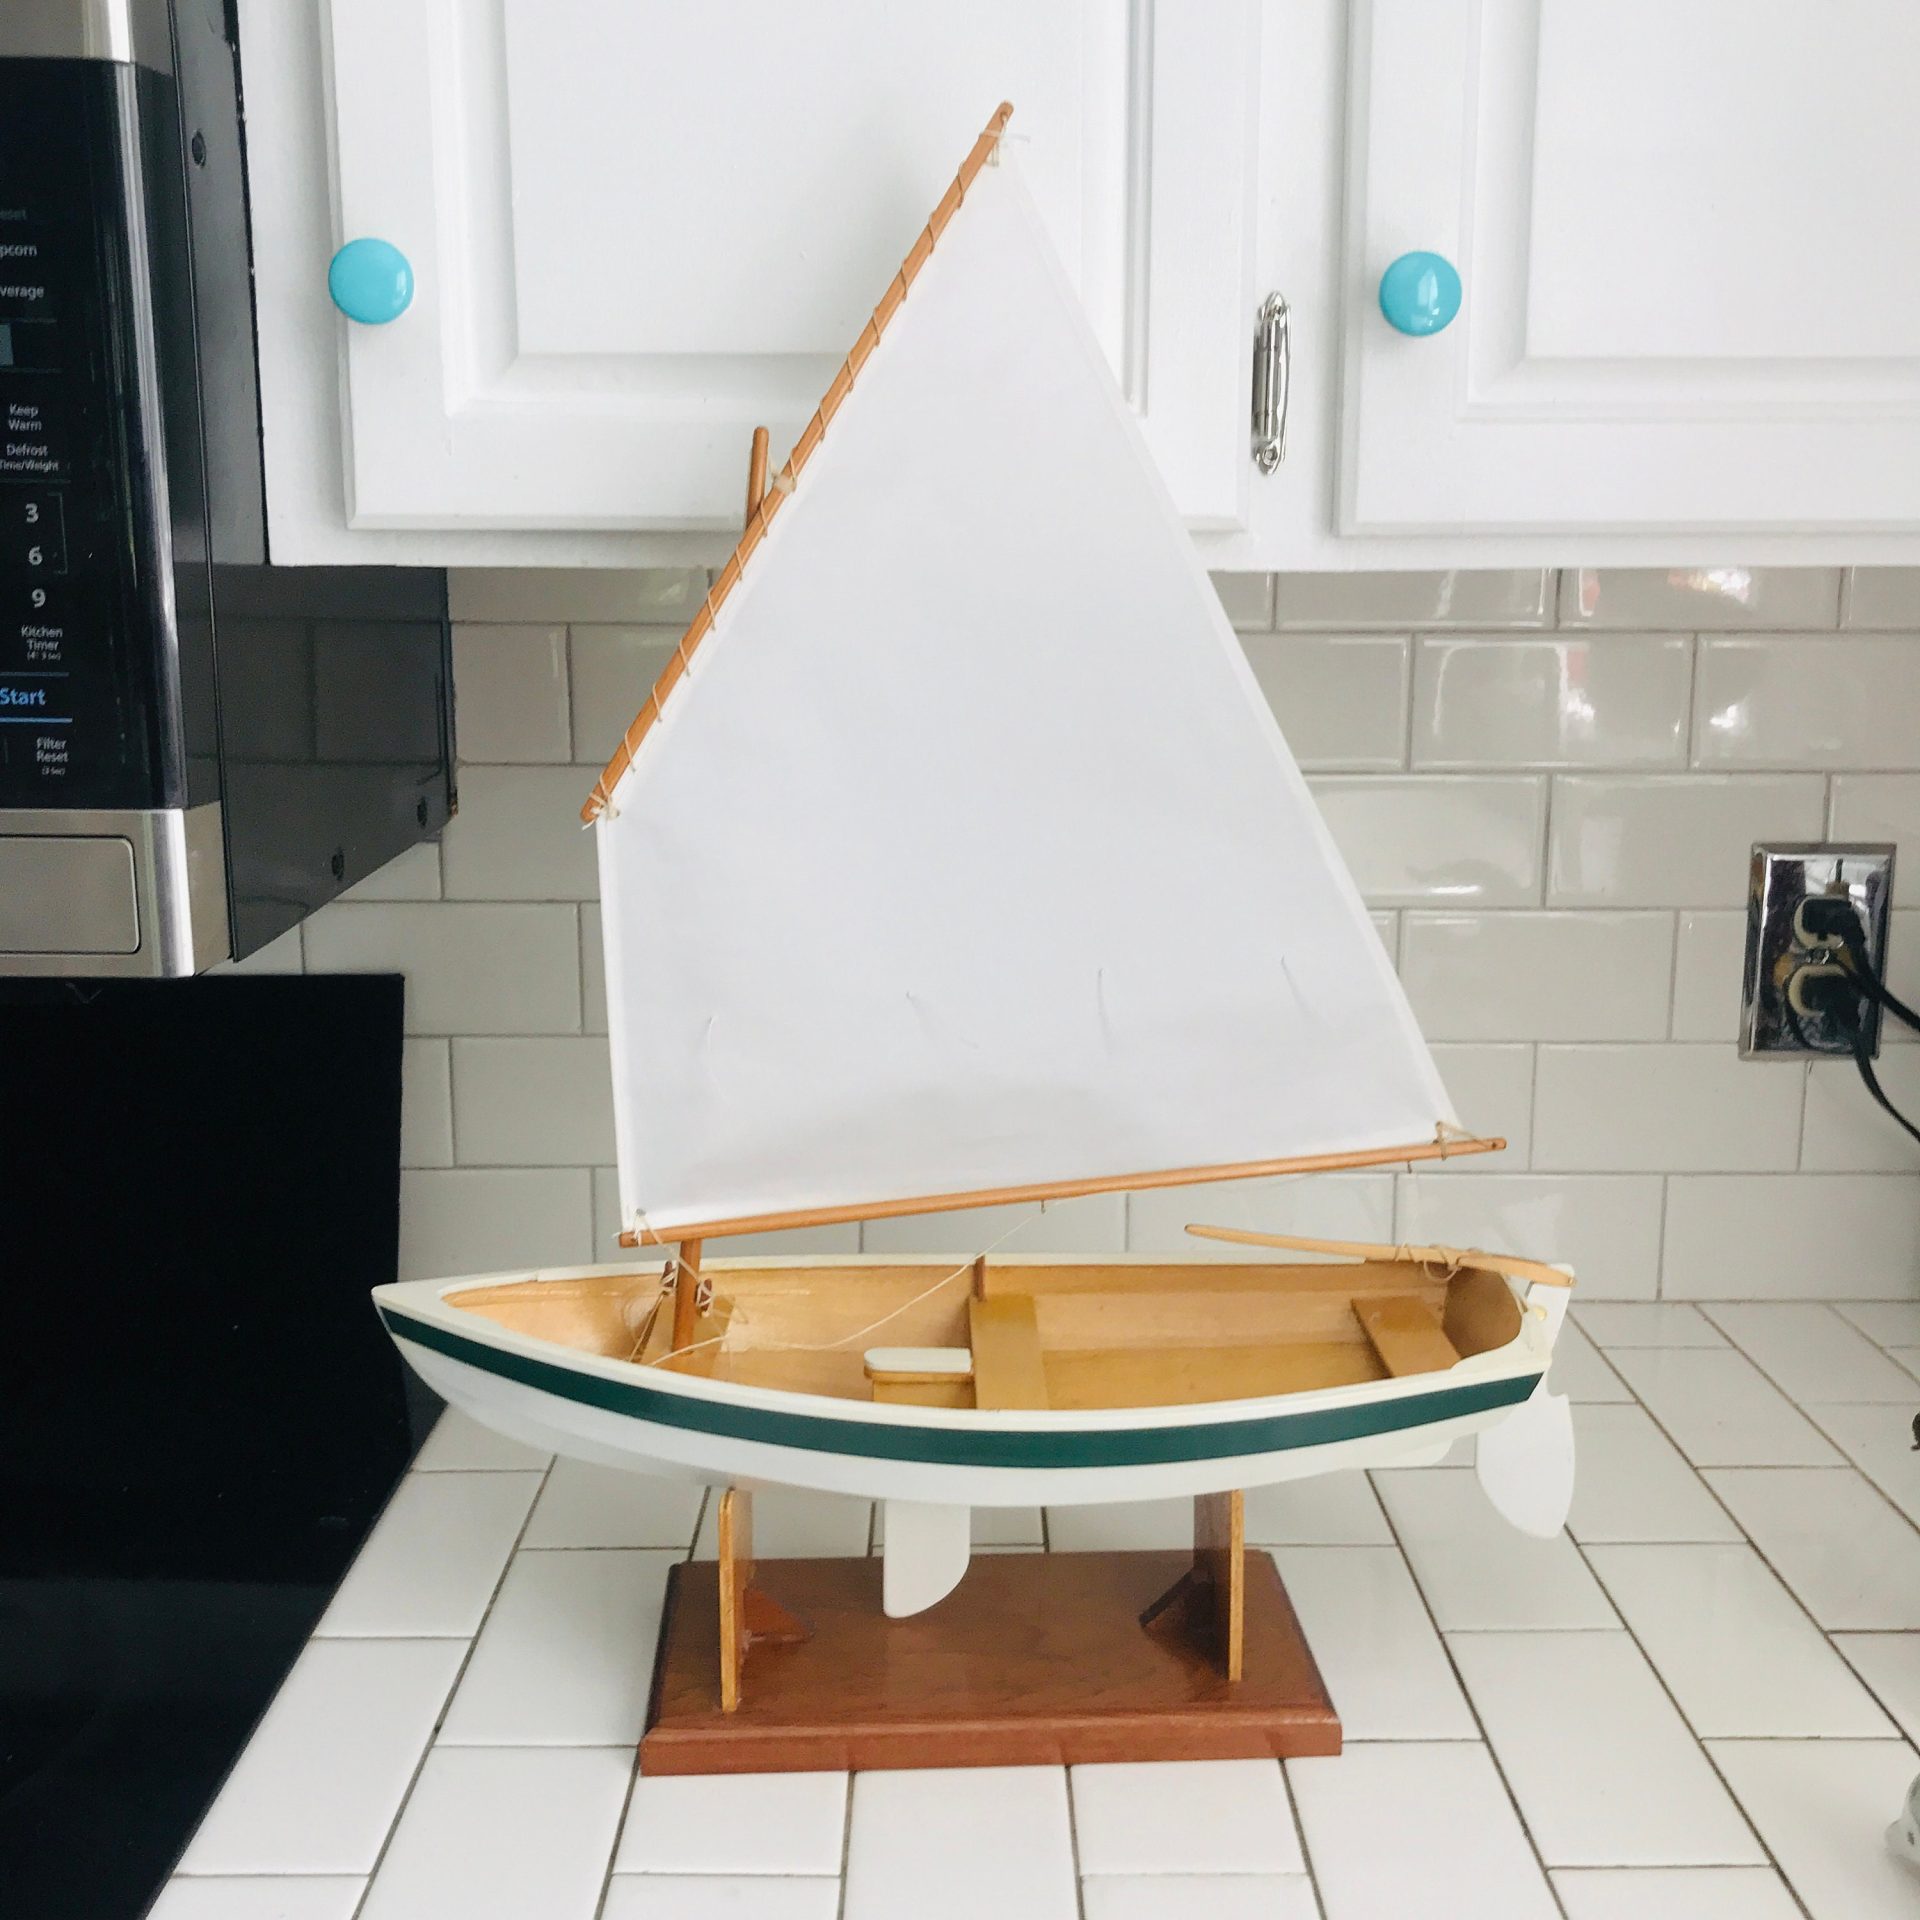 https://www.truevintageantiques.com/wp-content/uploads/2022/05/vintage-fantastic-model-boat-collectible-nautical-decor-wooden-hand-made-beach-cottage-cabin-lodge-62915b079-scaled.jpg